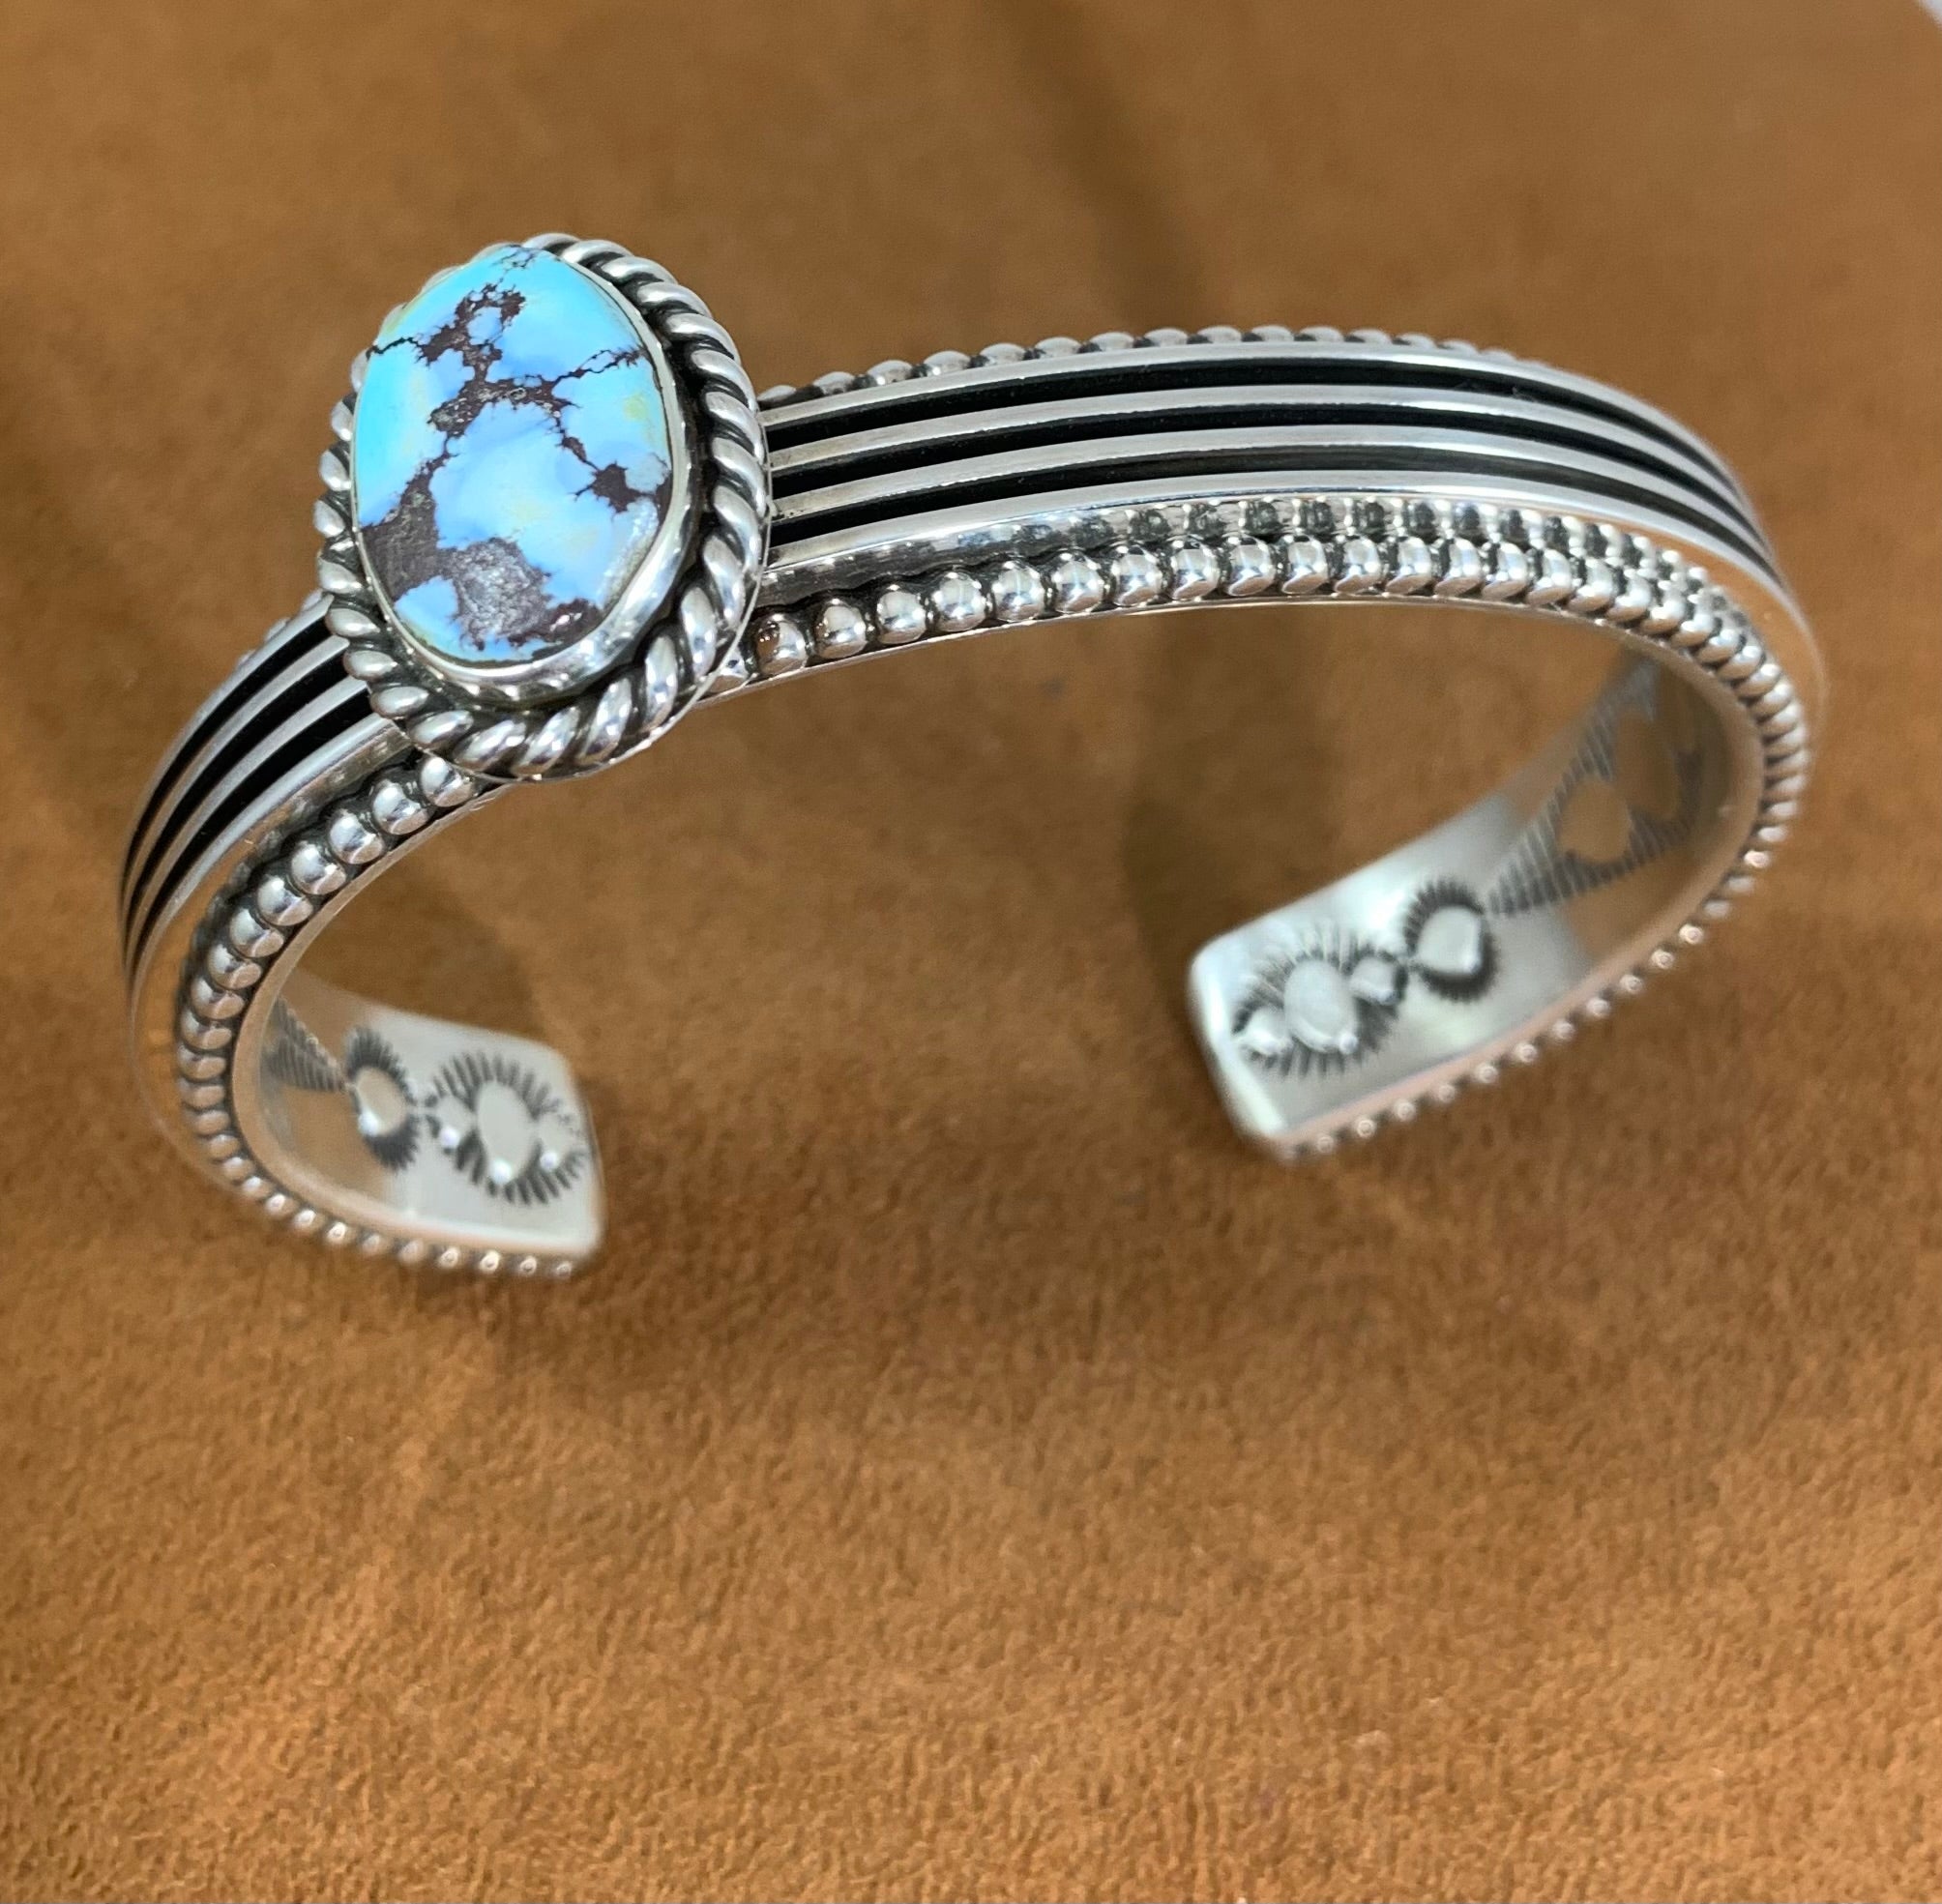 "With a Side of Beauty" Golden Hills Turquoise Cuff by Jeanette Nelson.